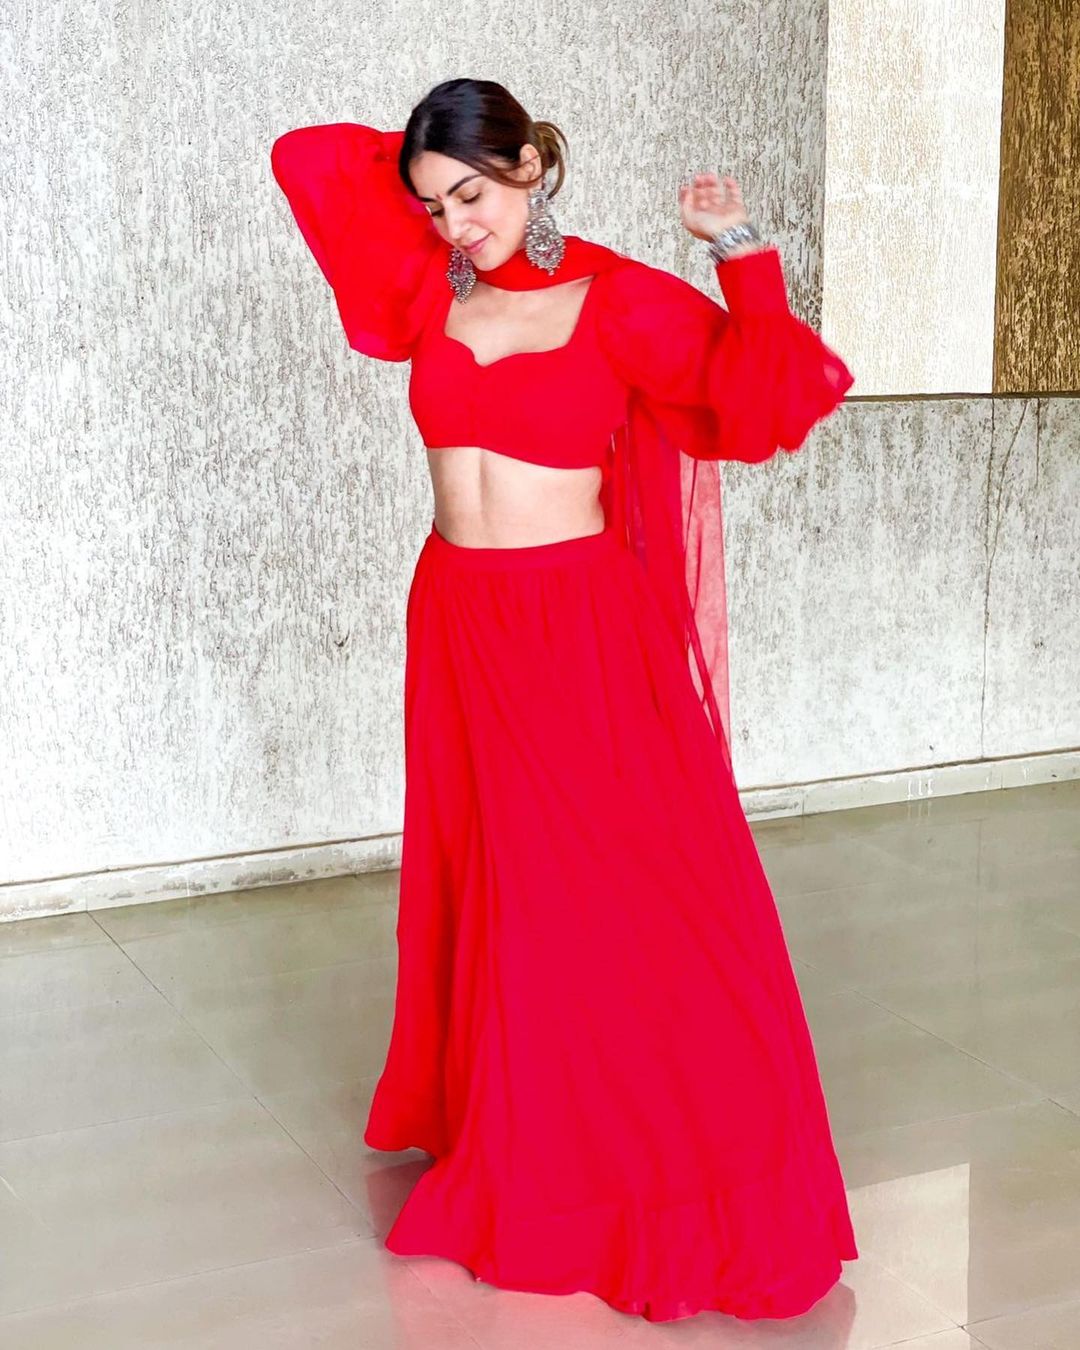 What A Beauty: Shraddha Arya looks gorgeous in red ethnic blouse and lehenga, does a gorgeous spin to mesmerize fans | IWMBuzz